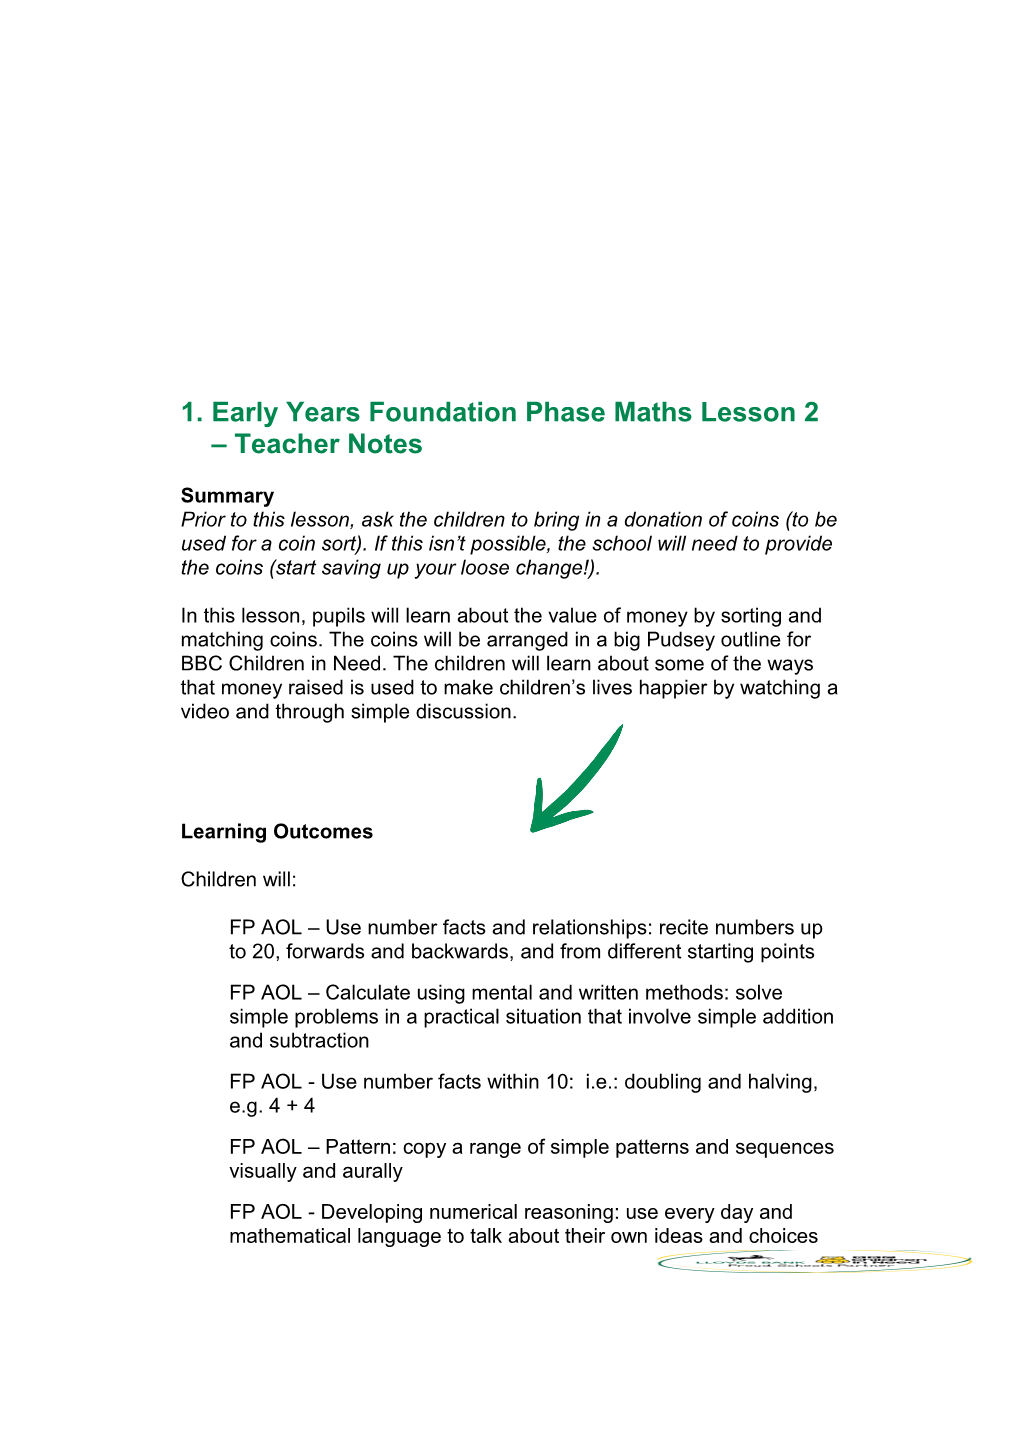 Early Years Foundation Phase Maths Lesson 2 Teacher Notes